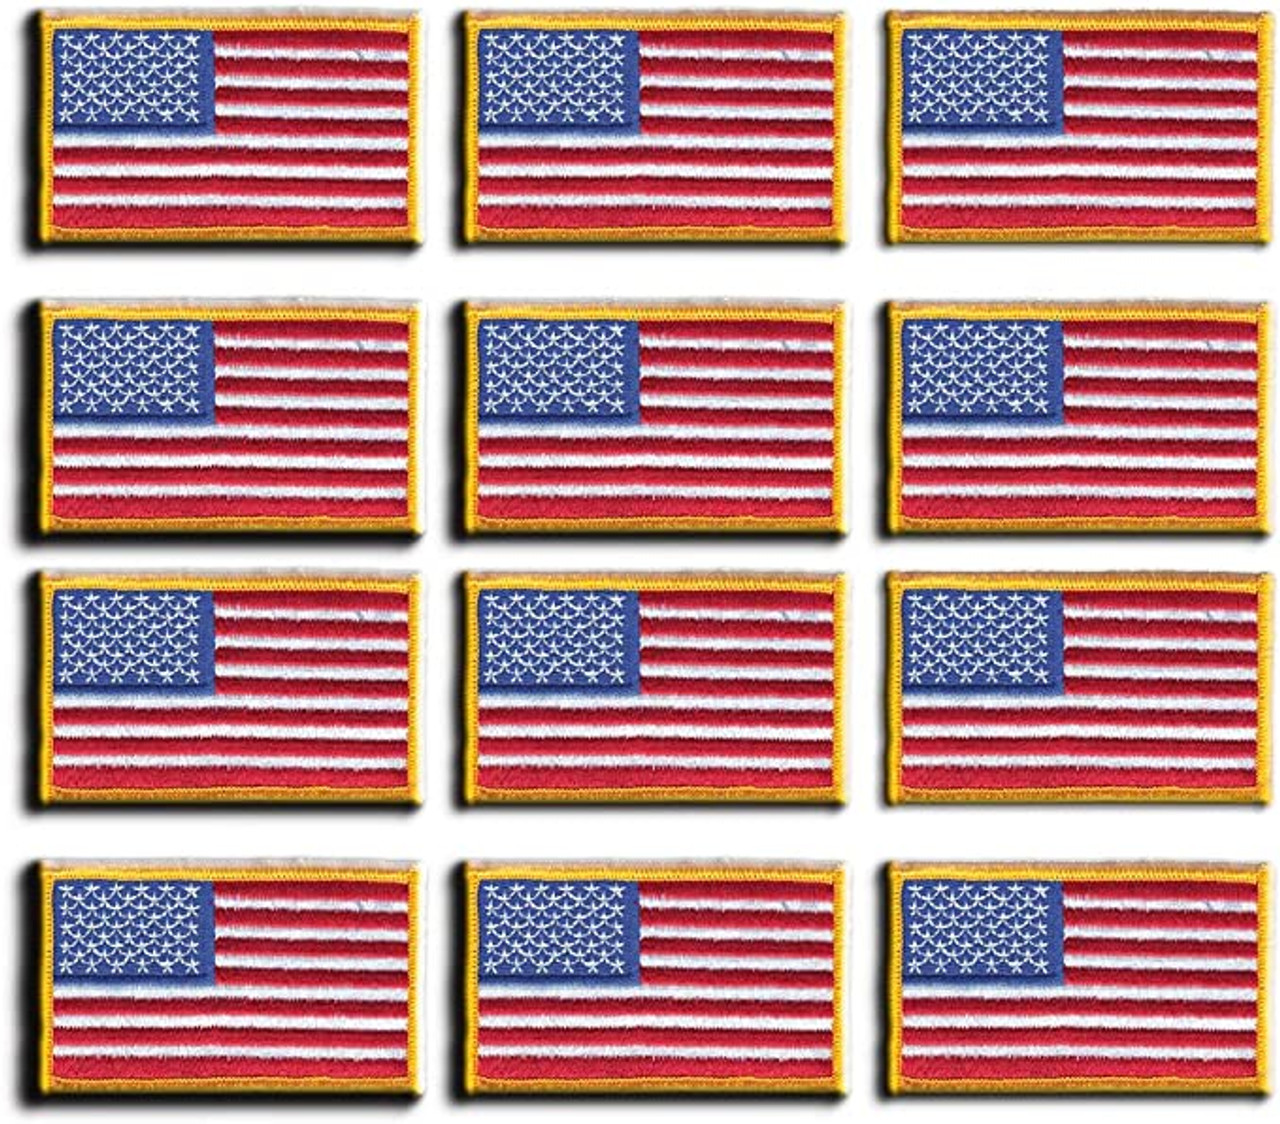 12 Pack - American Flag Embroidered Patch Gold Border USA United States of America - US Flag Patch - Sew on - Military/Army/Police Flag